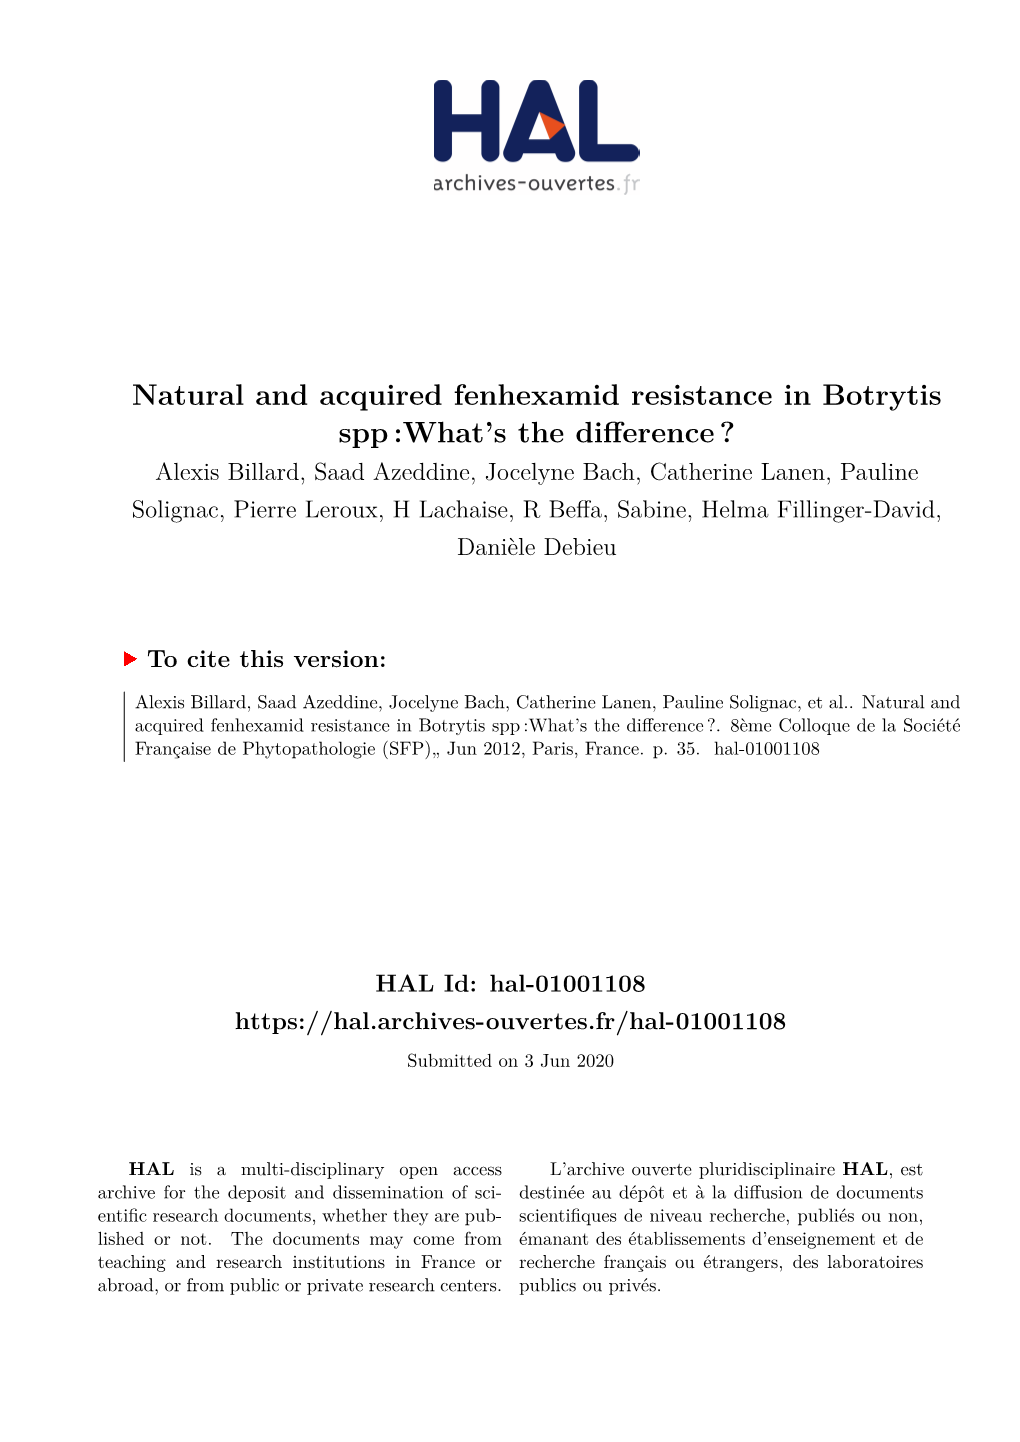 Natural and Acquired Fenhexamid Resistance in Botrytis Spp:What's the Difference?